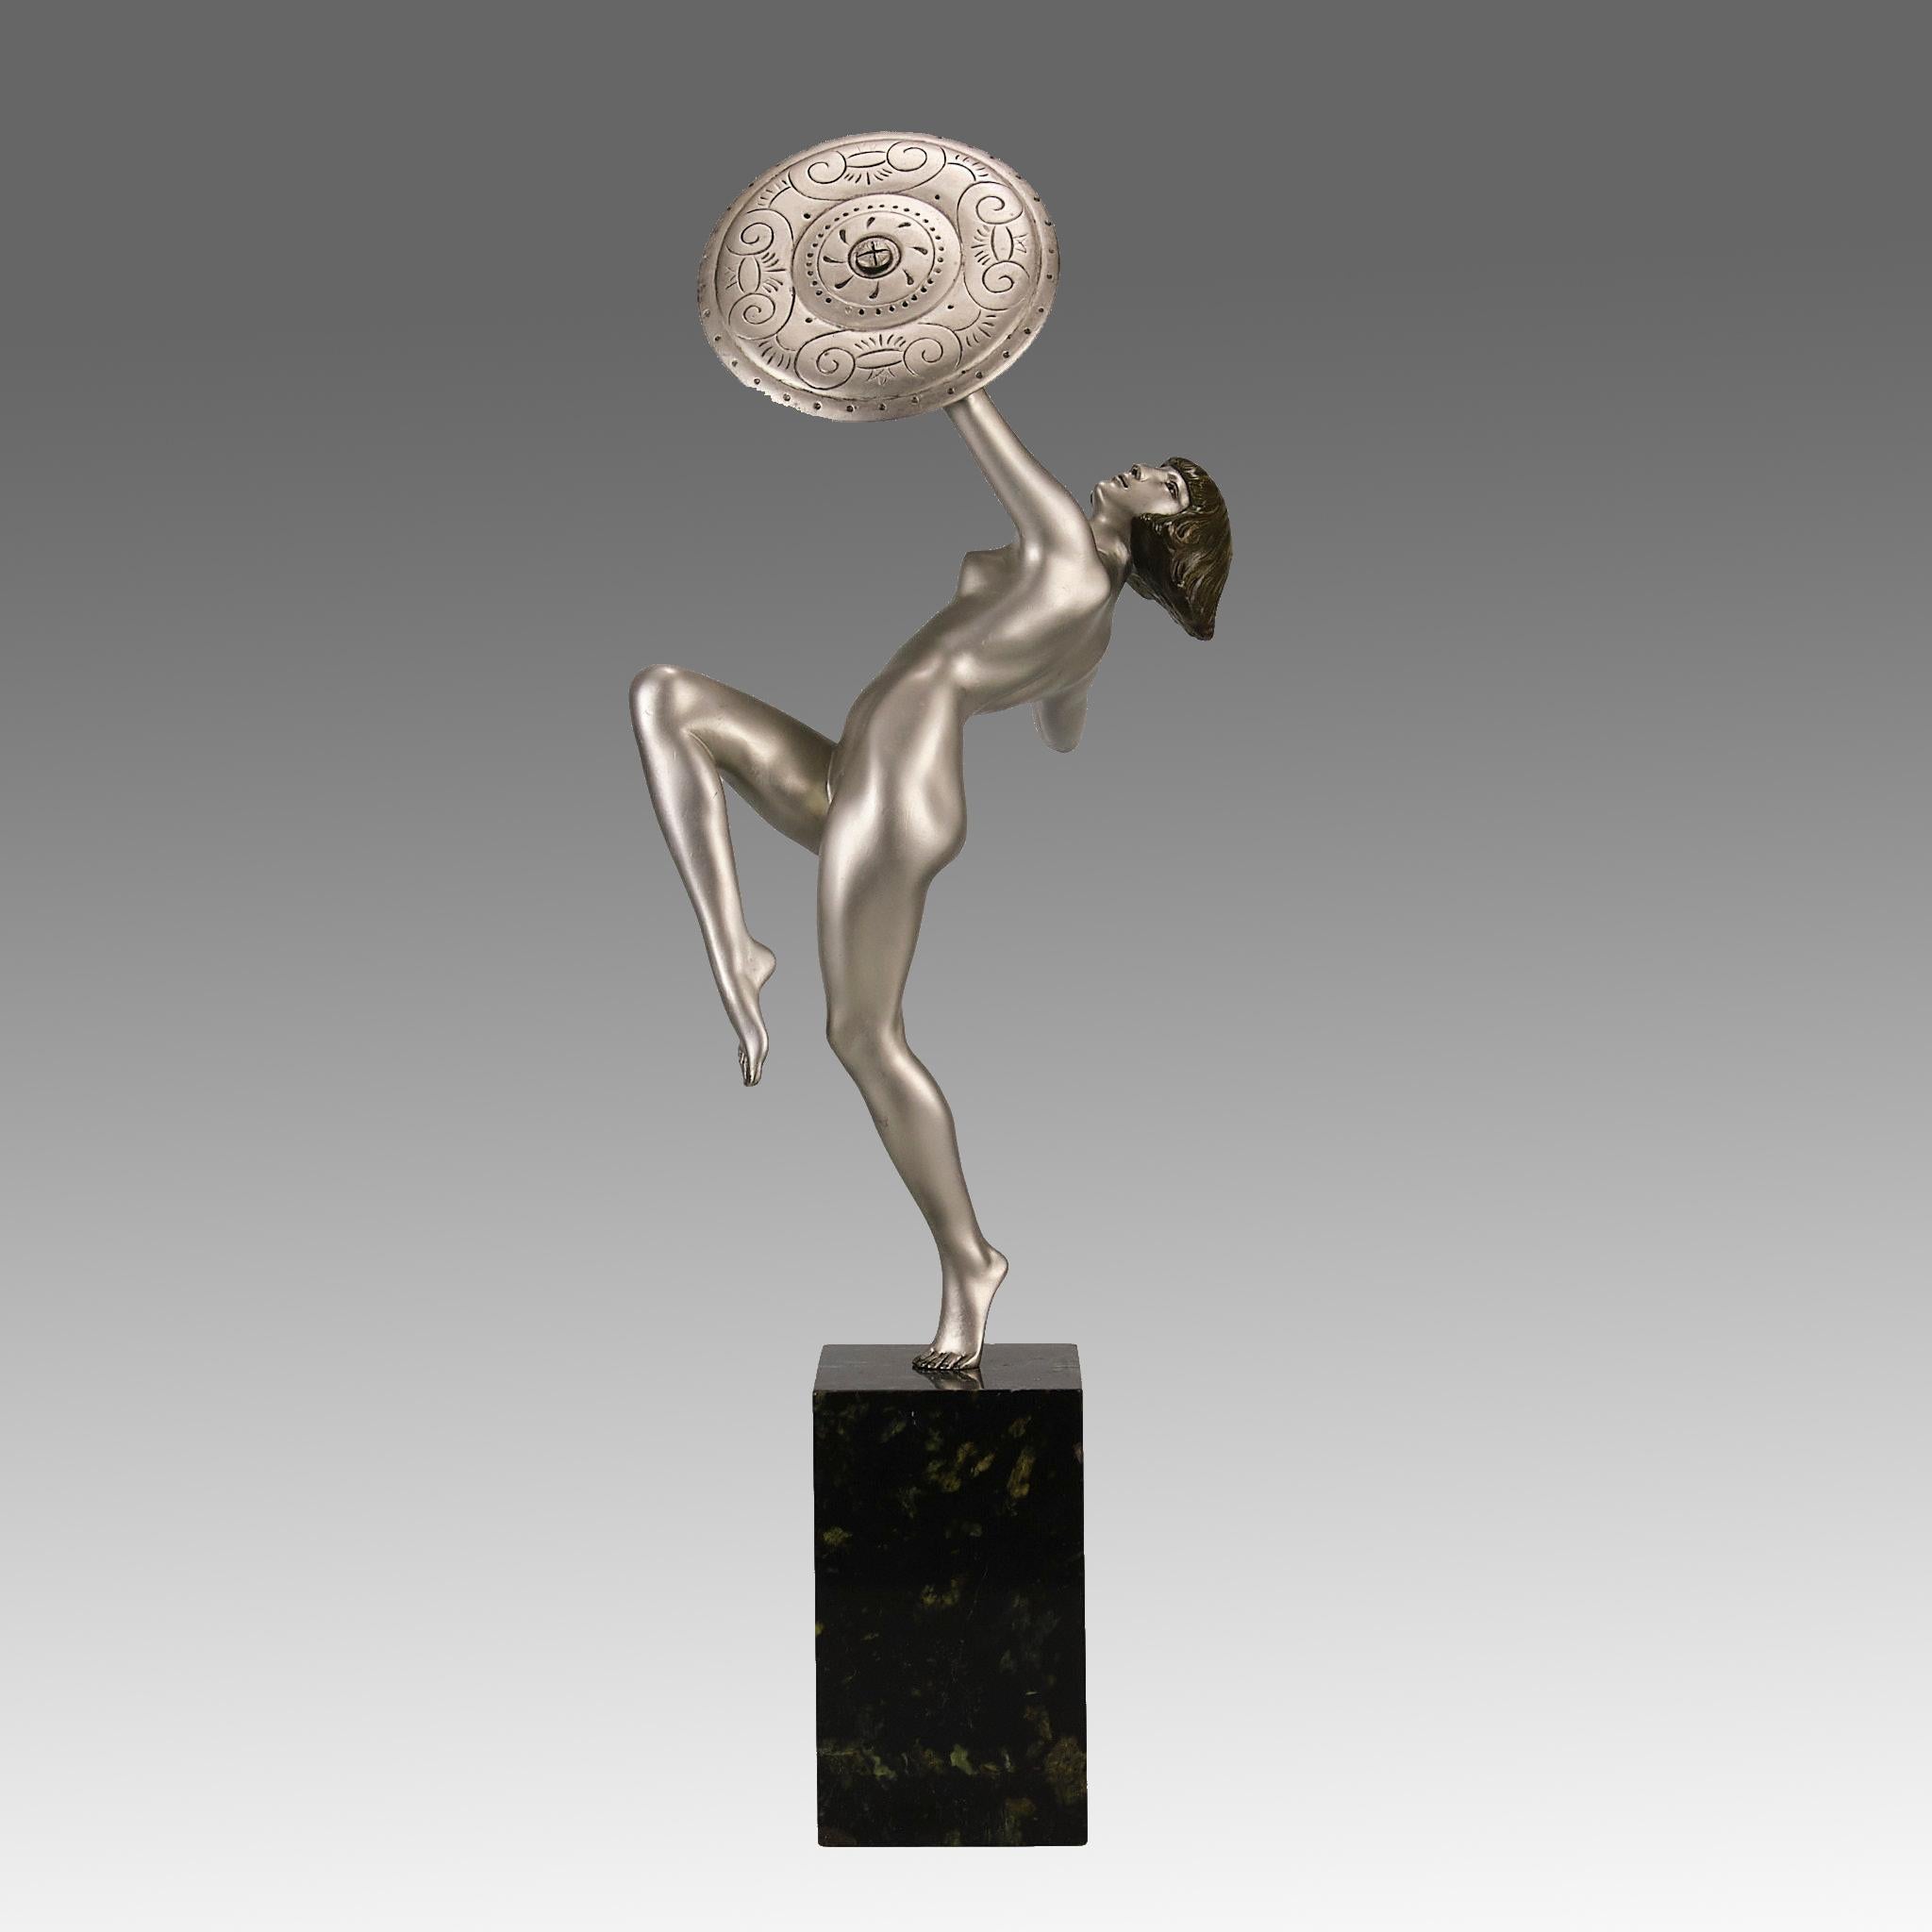 An iconic Art Deco cold painted bronze sculpture of a female warrior holding a shield and sword in an energetic pose, exhibiting fine colour and detail, raised on a black marble base and signed Le Faguays

ADDITIONAL INFORMATION
Height:             